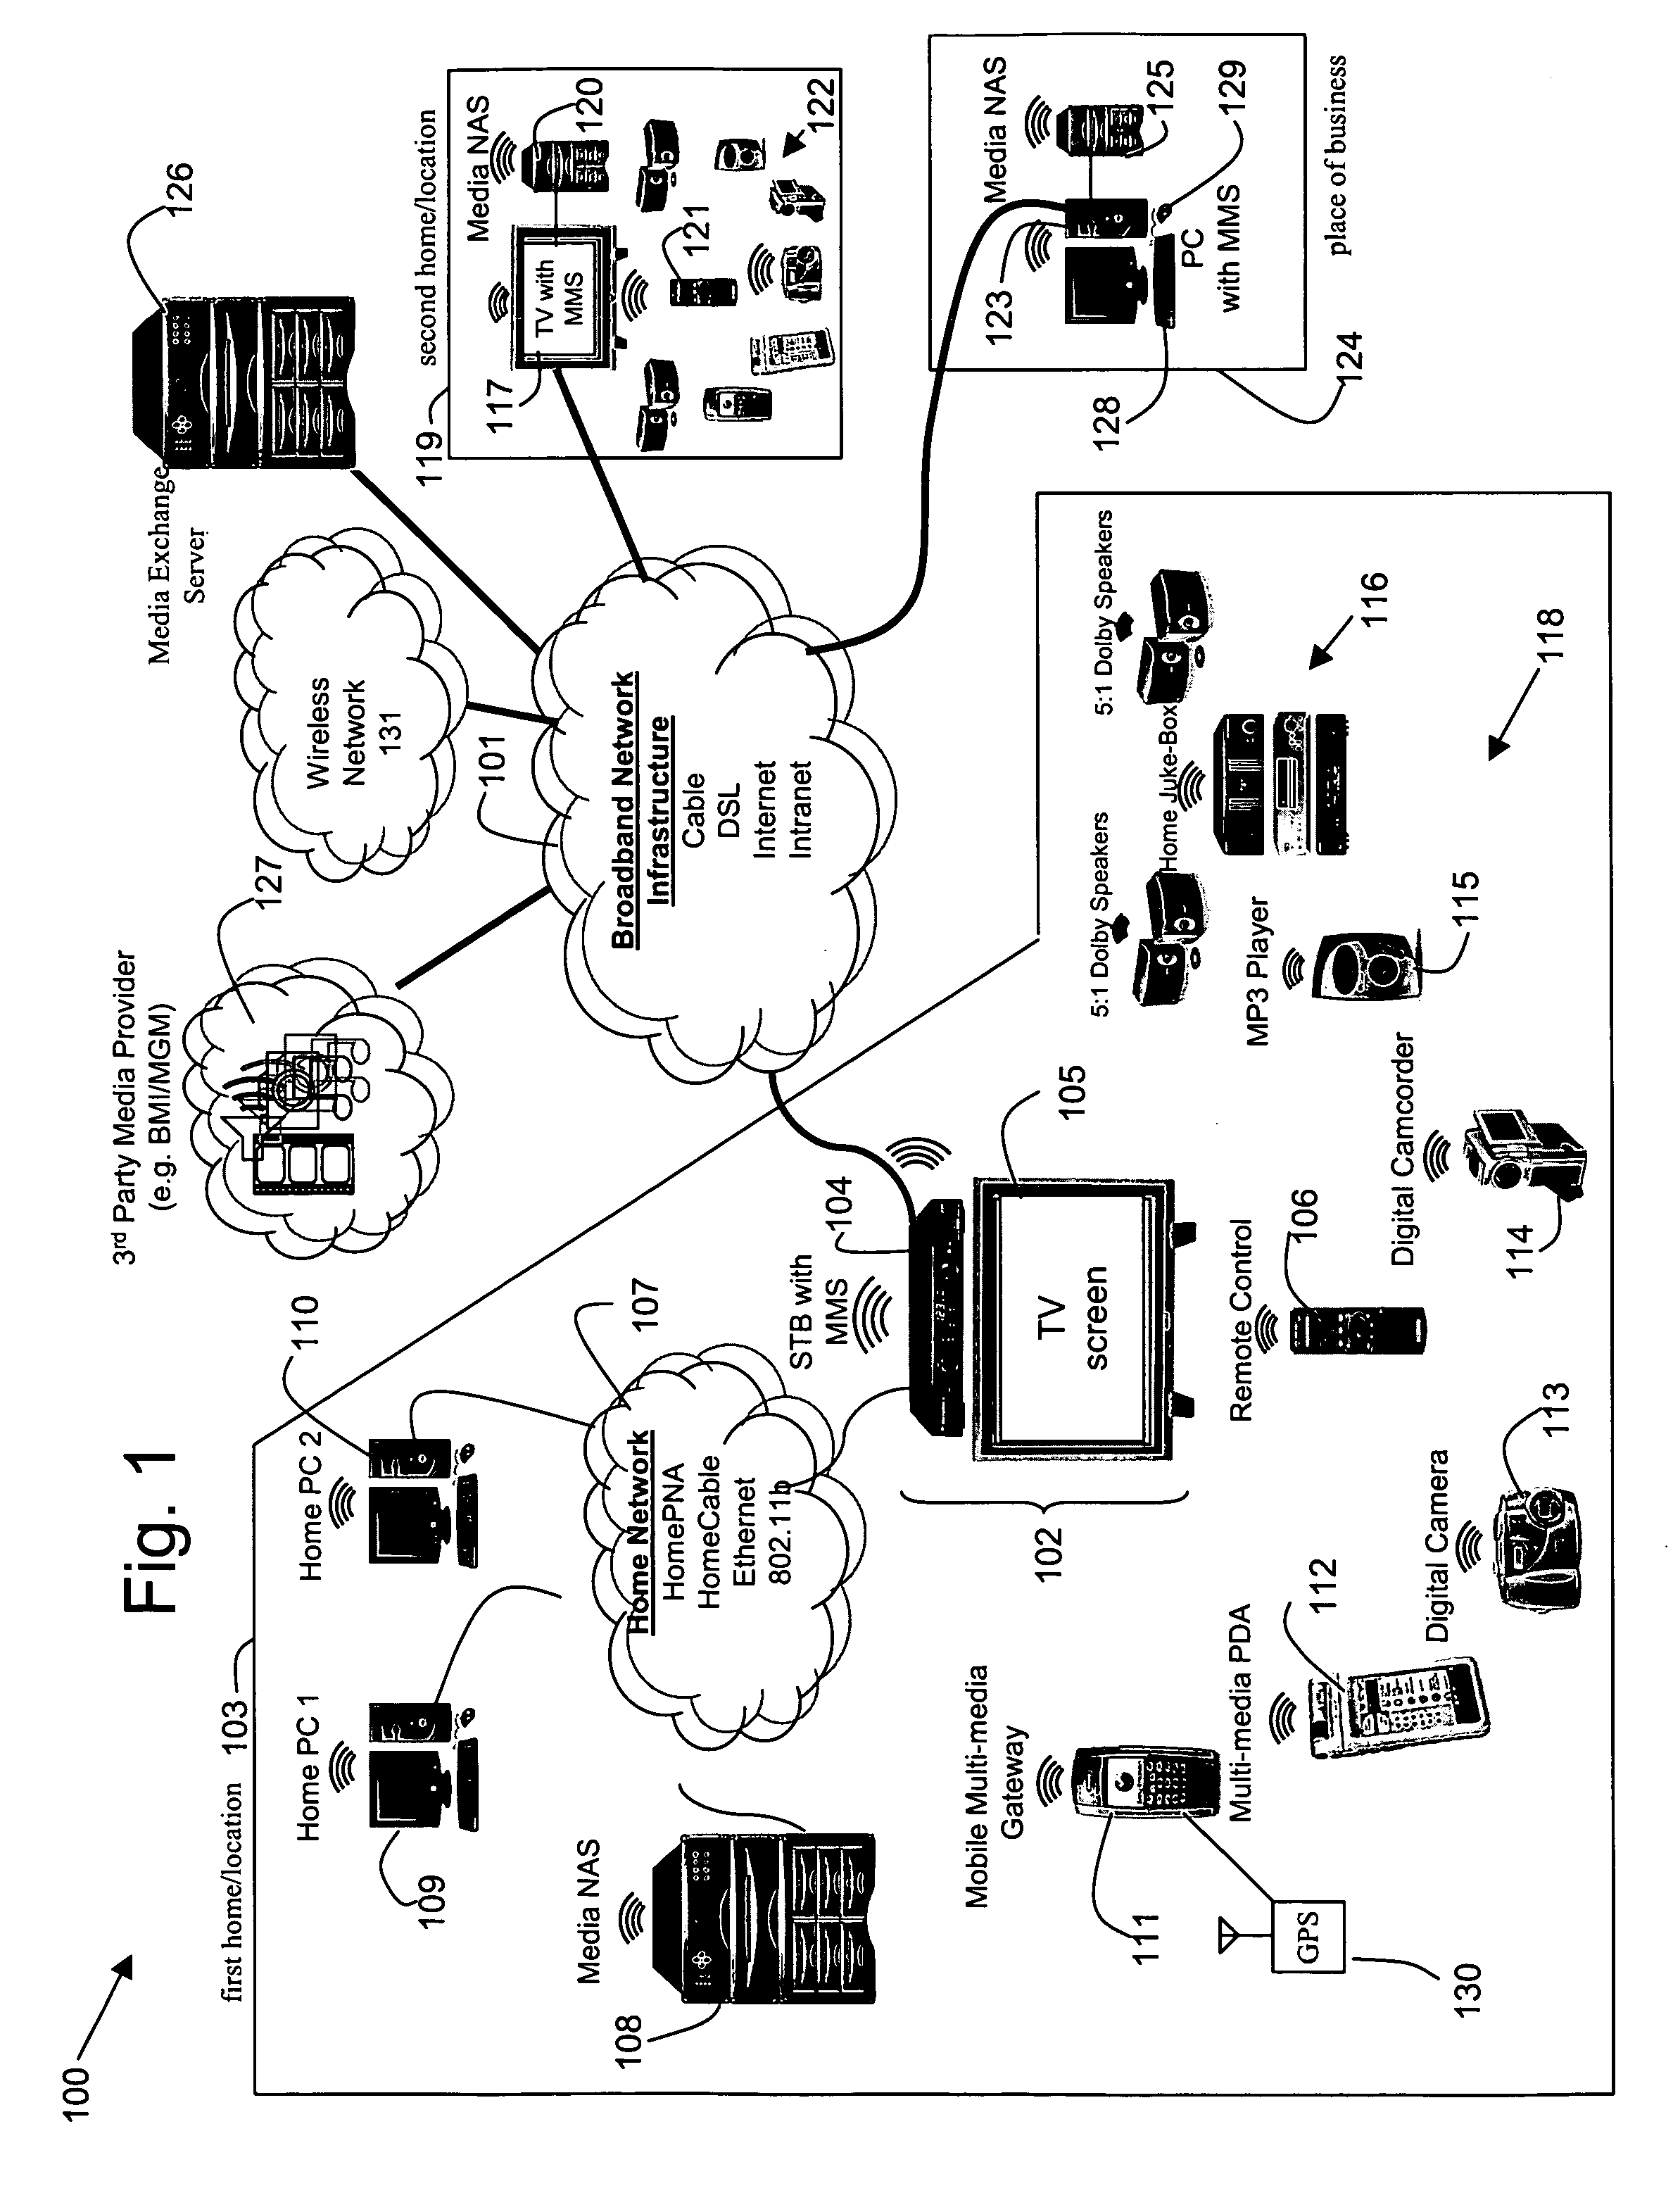 System, method, and apparatus for secure sharing of multimedia content across several electronic devices